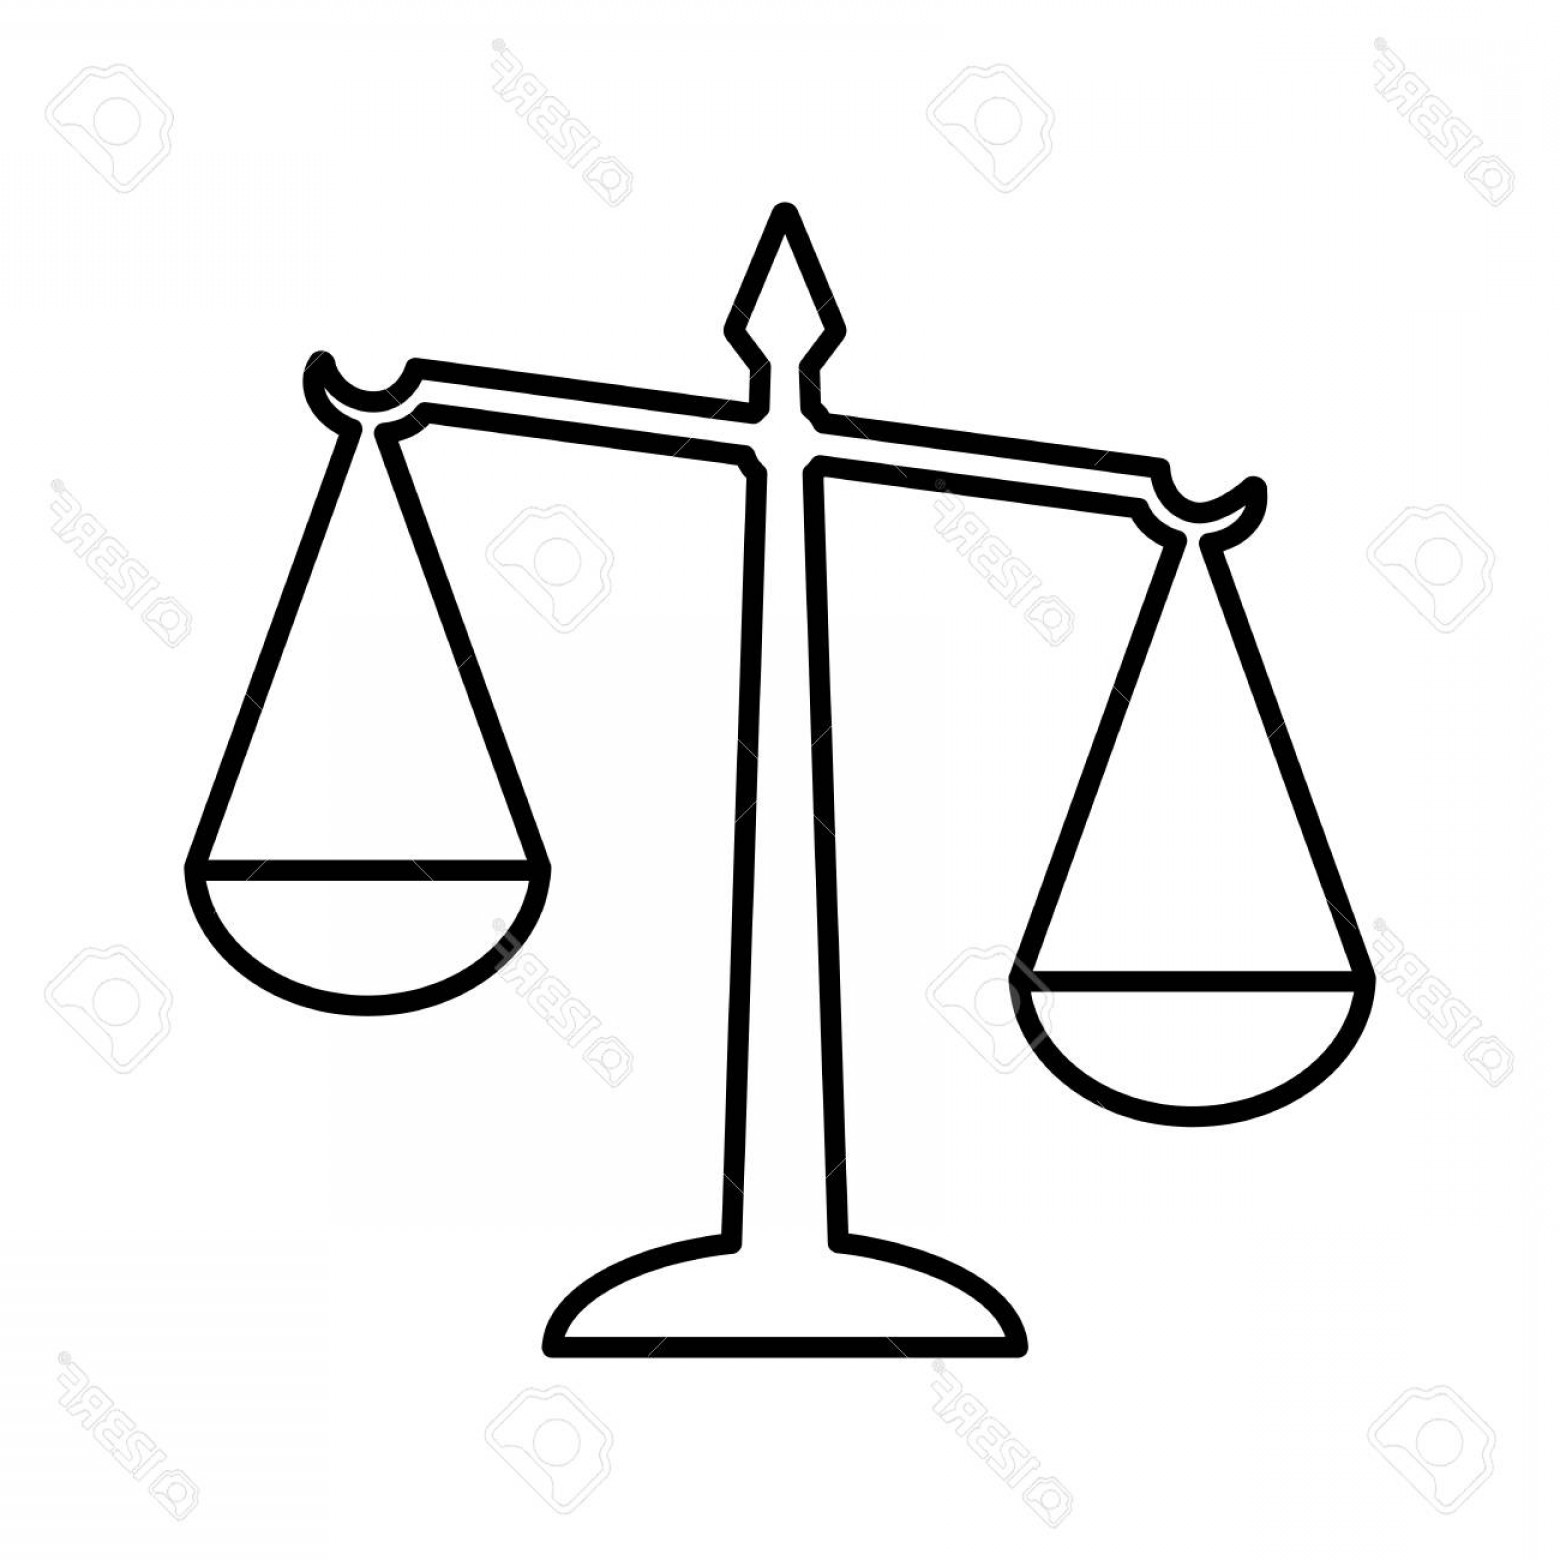 Justice clipart bill law. Collection of free download